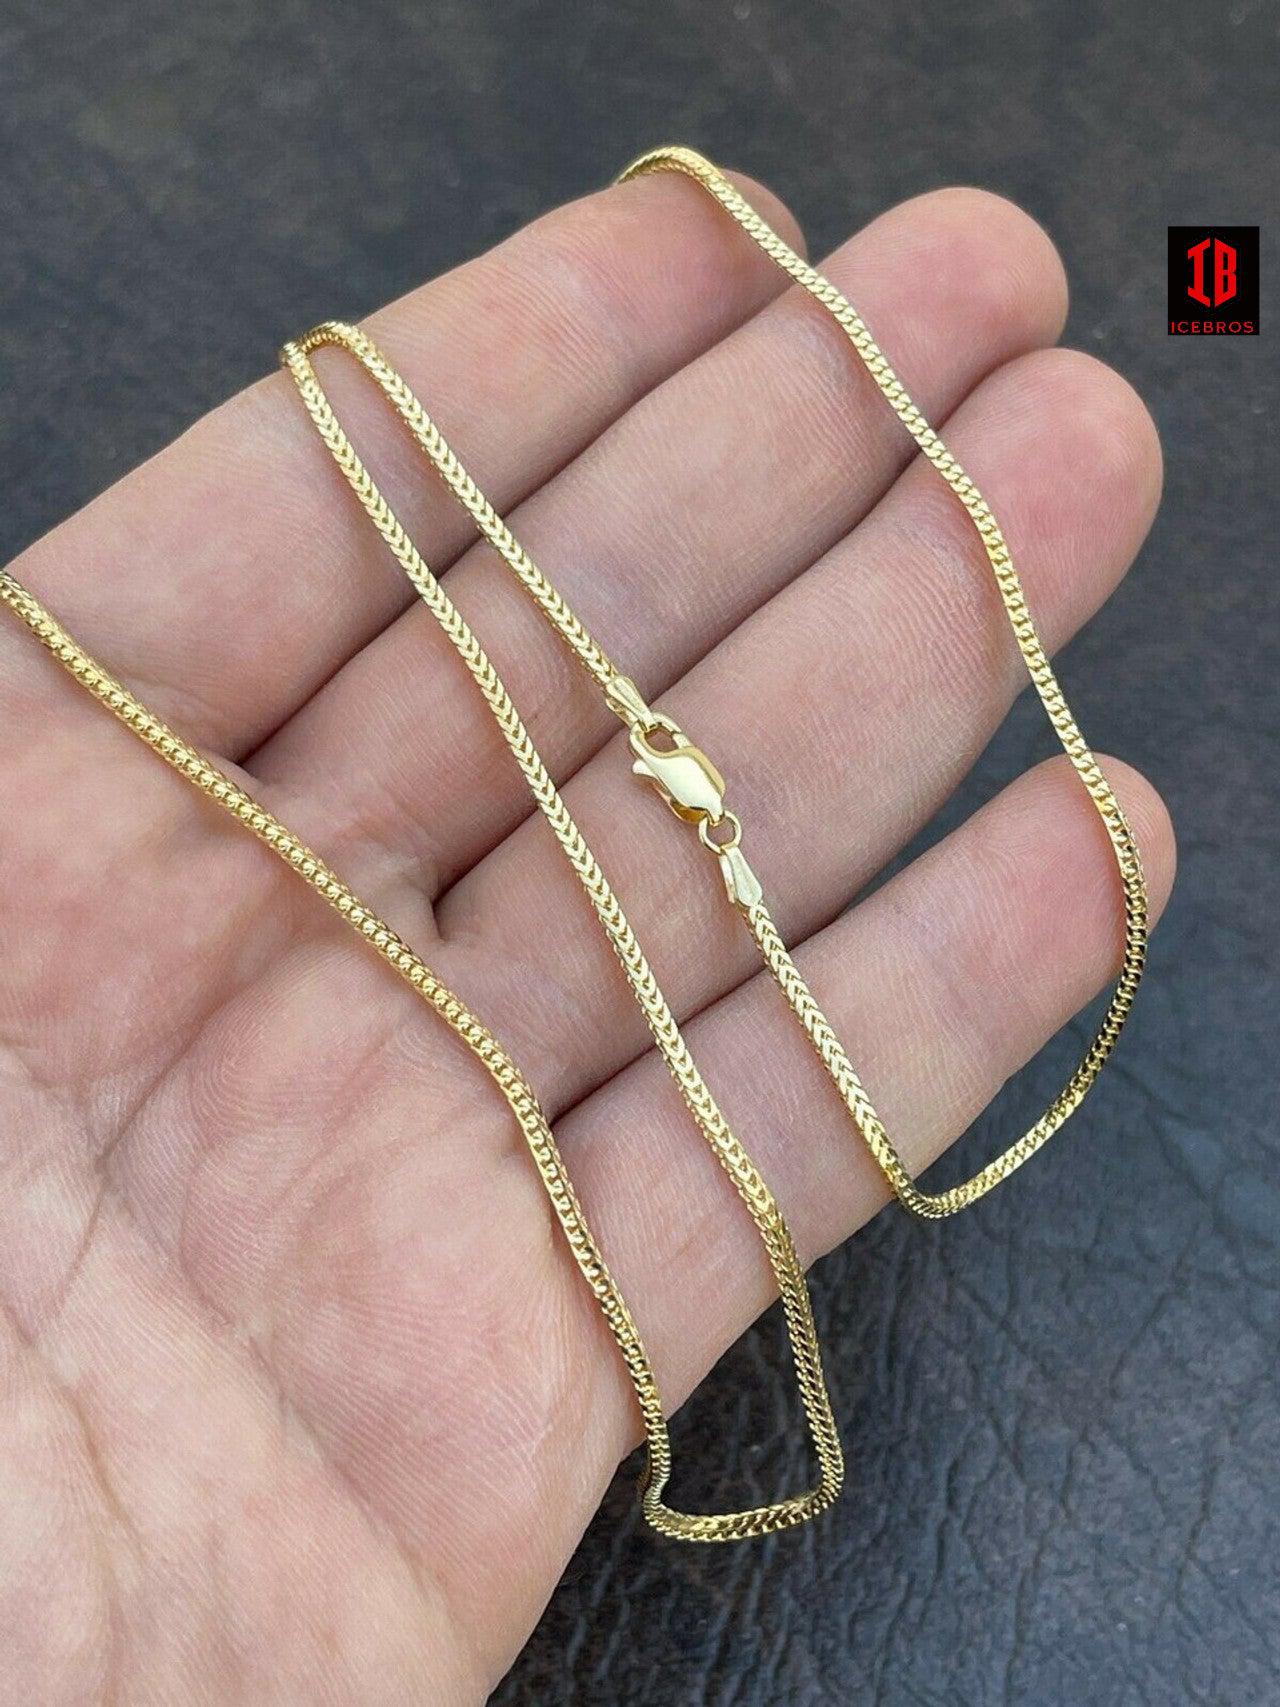 14k Solid Gold Franco Link Chain 1.5mm Necklace For Pendant Mens Ladies 16-24"